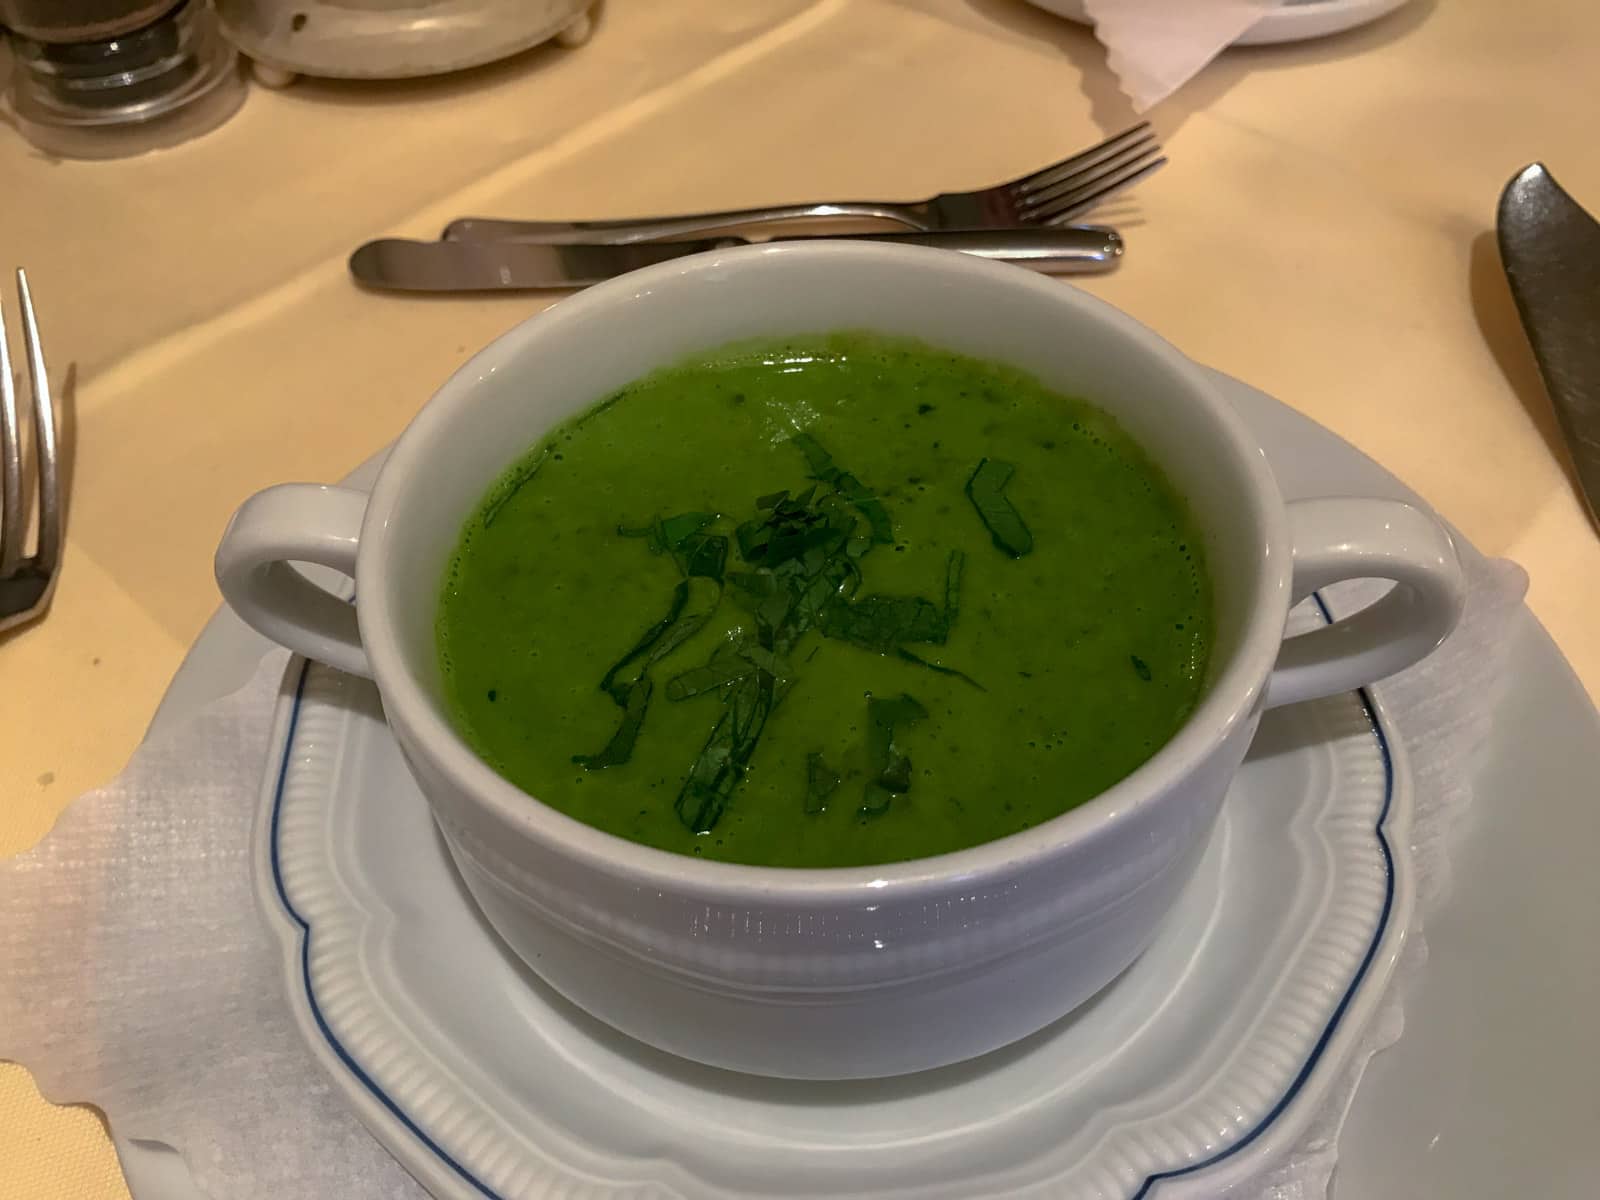 A small white crockery pot with two handles on either side, with green soup in it.